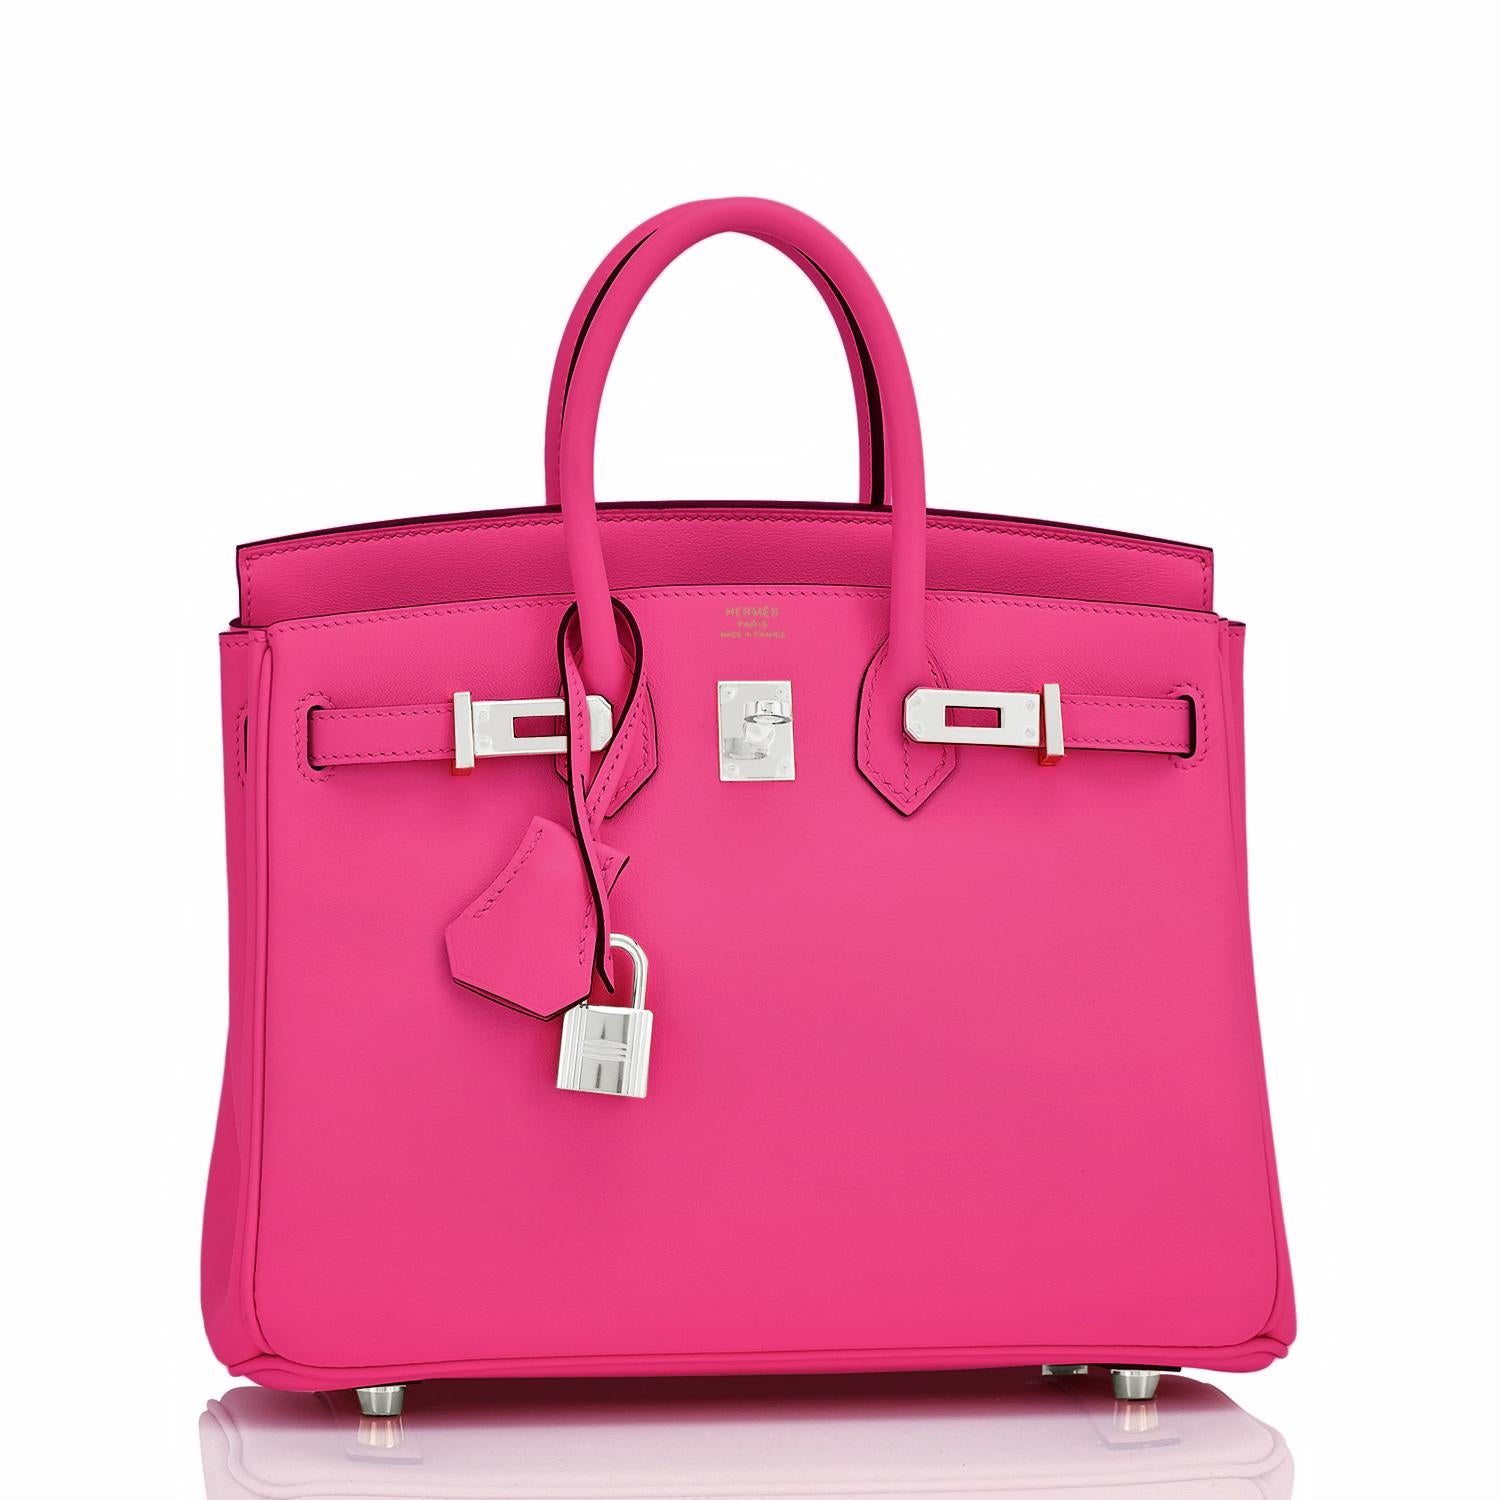 Hermes Birkin 25 Rose Shocking Jonathan Pink Bag Z Stamp, 2021
Brand New in Box. Store Fresh. Pristine Condition (with plastic on hardware) 
Perfect gift! Comes in full set with clochette, lock, keys, raincoat, dust bag, and Hermes box.
Just